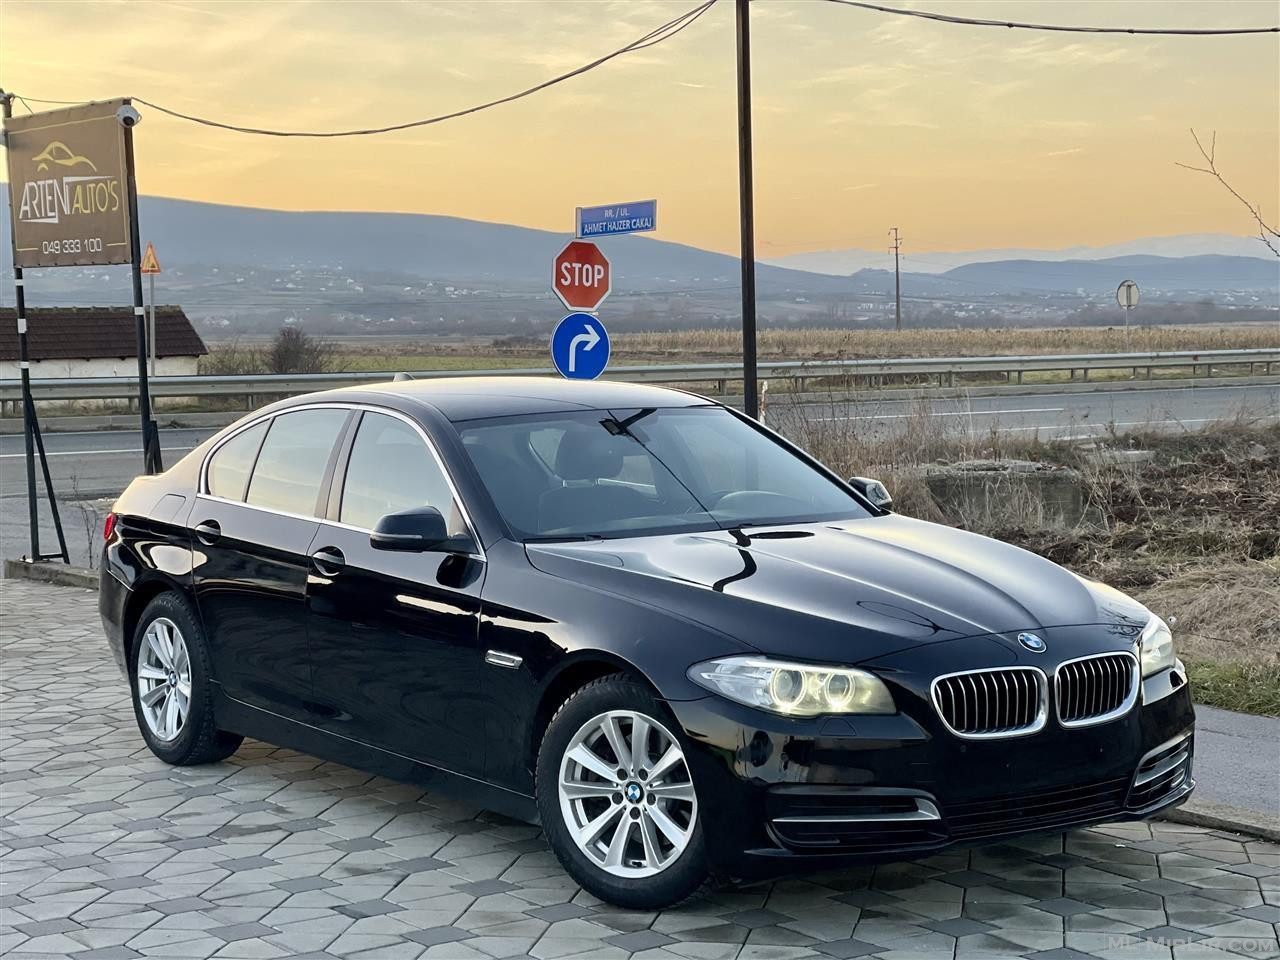 Bmw F10 2.0d Luxory Line Model 2014 FaceLift Full Opsion